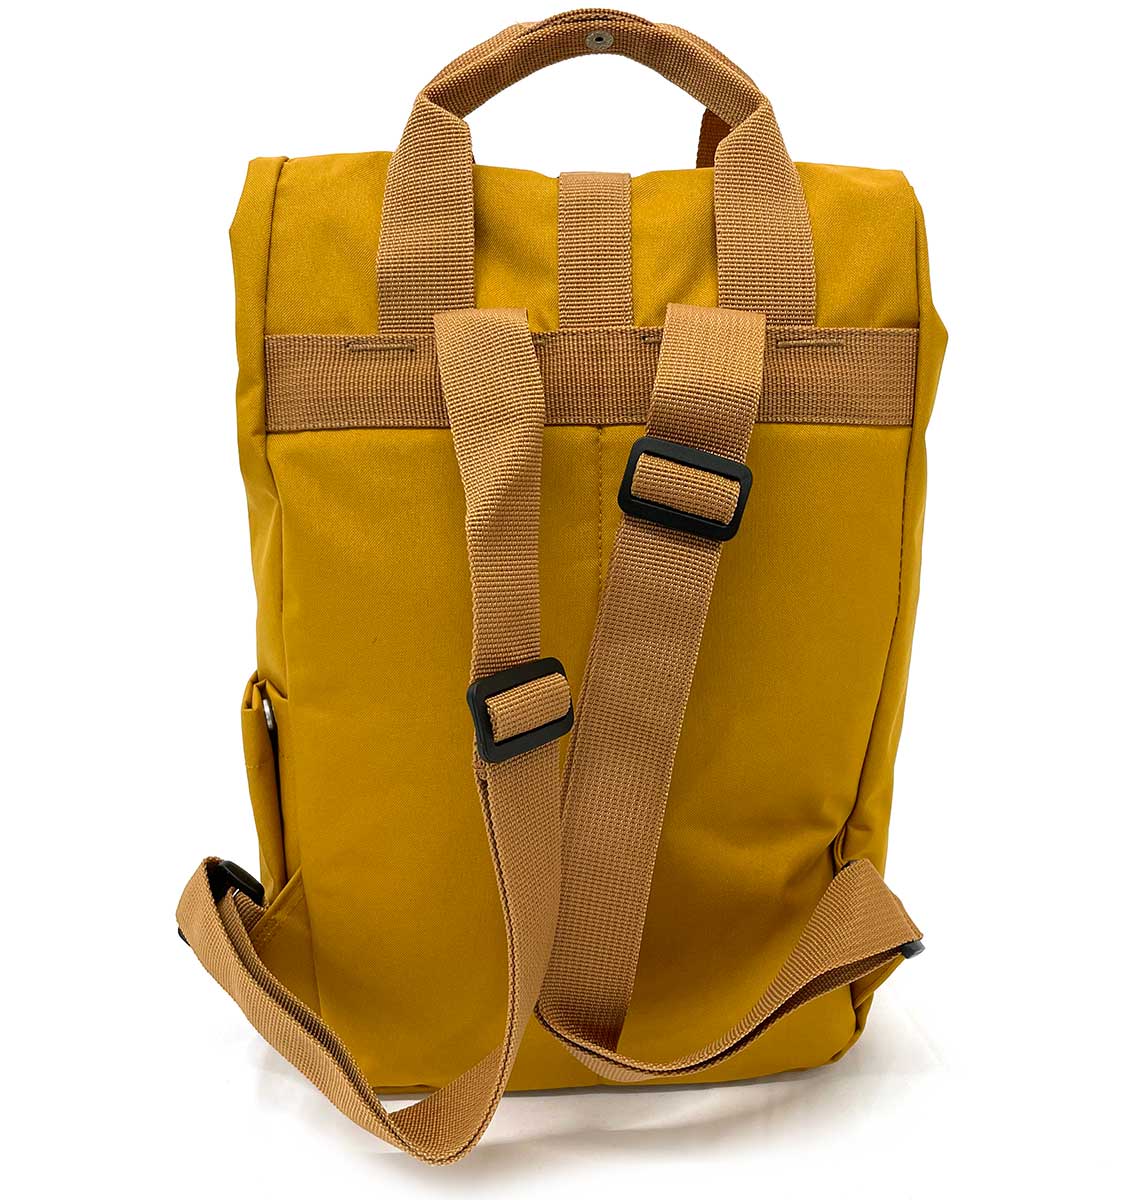 Bumble Bee Mini Roll-top Recycled Backpack - Blue Panda